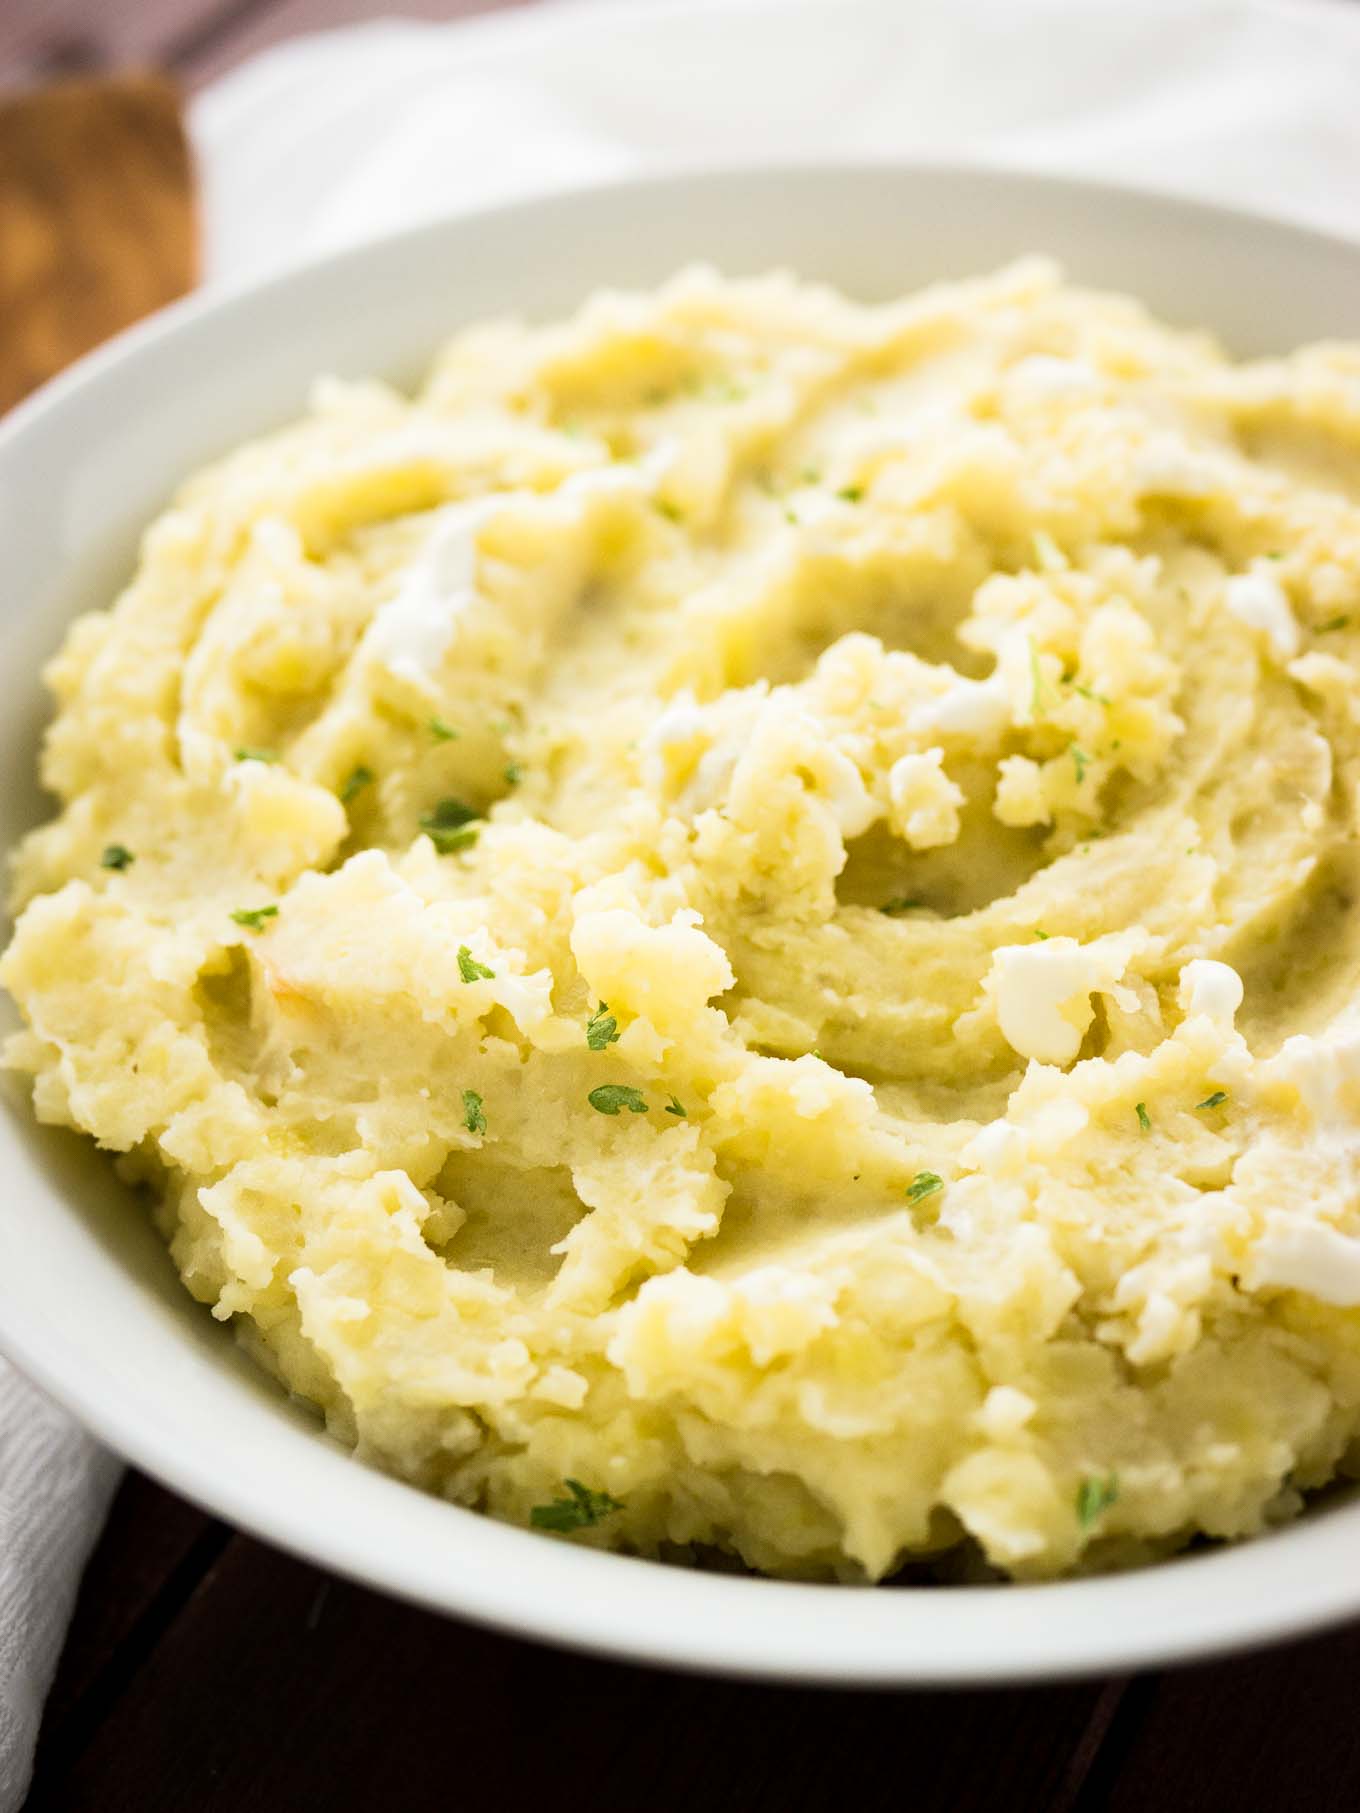 This Creamy Crock Pot Mashed Potatoes Recipe is SO easy and perfect to make ahead! A delicious slow cooker side dish for any meal throughout the fall and winter.